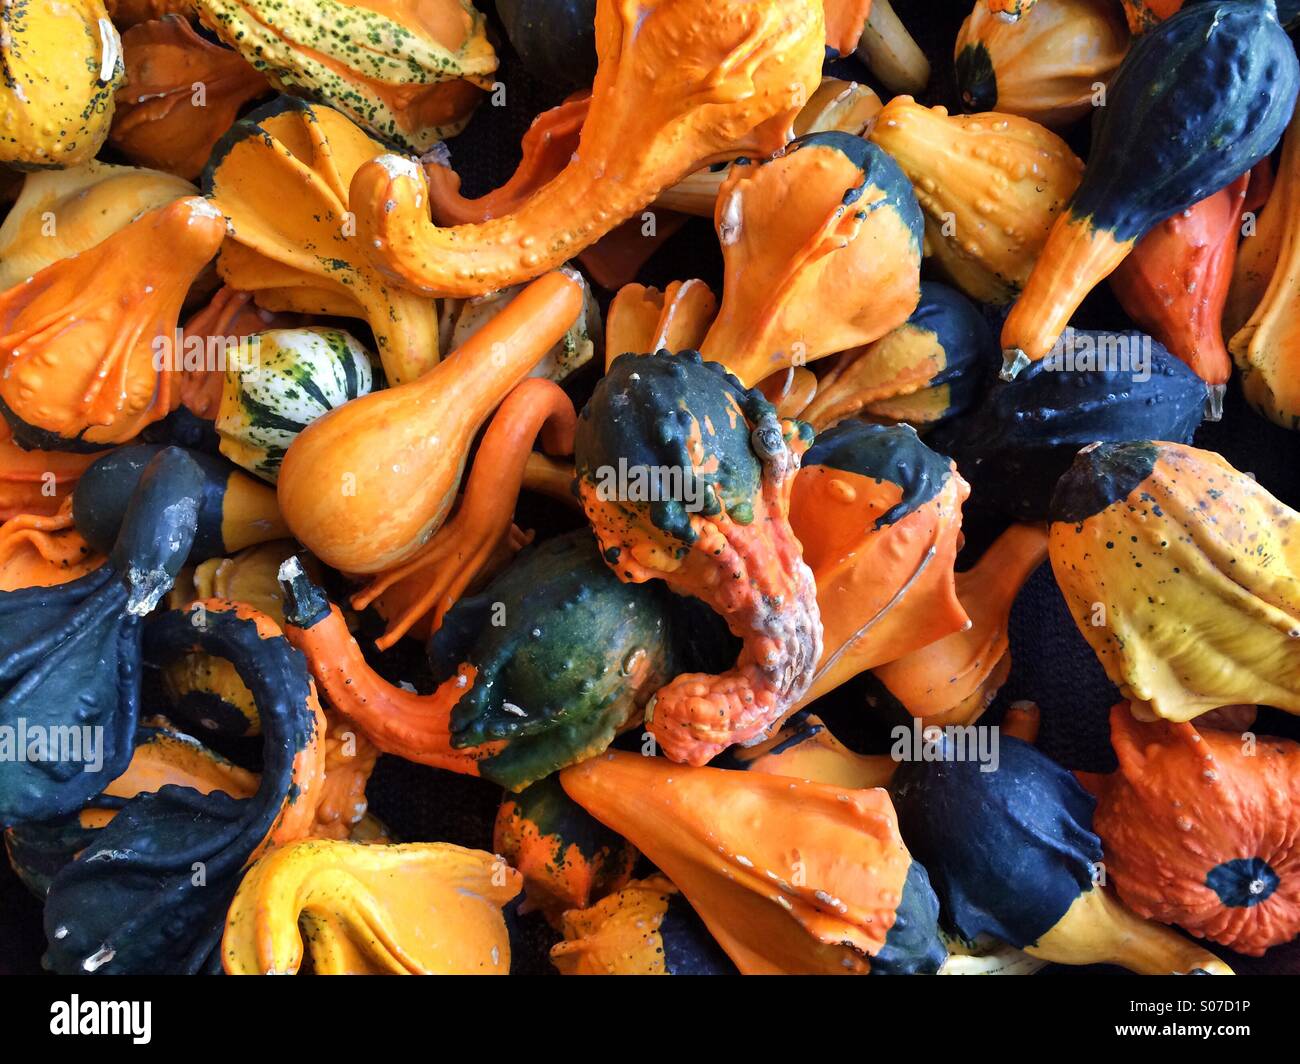 A large aasortment of fall gourds in bright colors Stock Photo